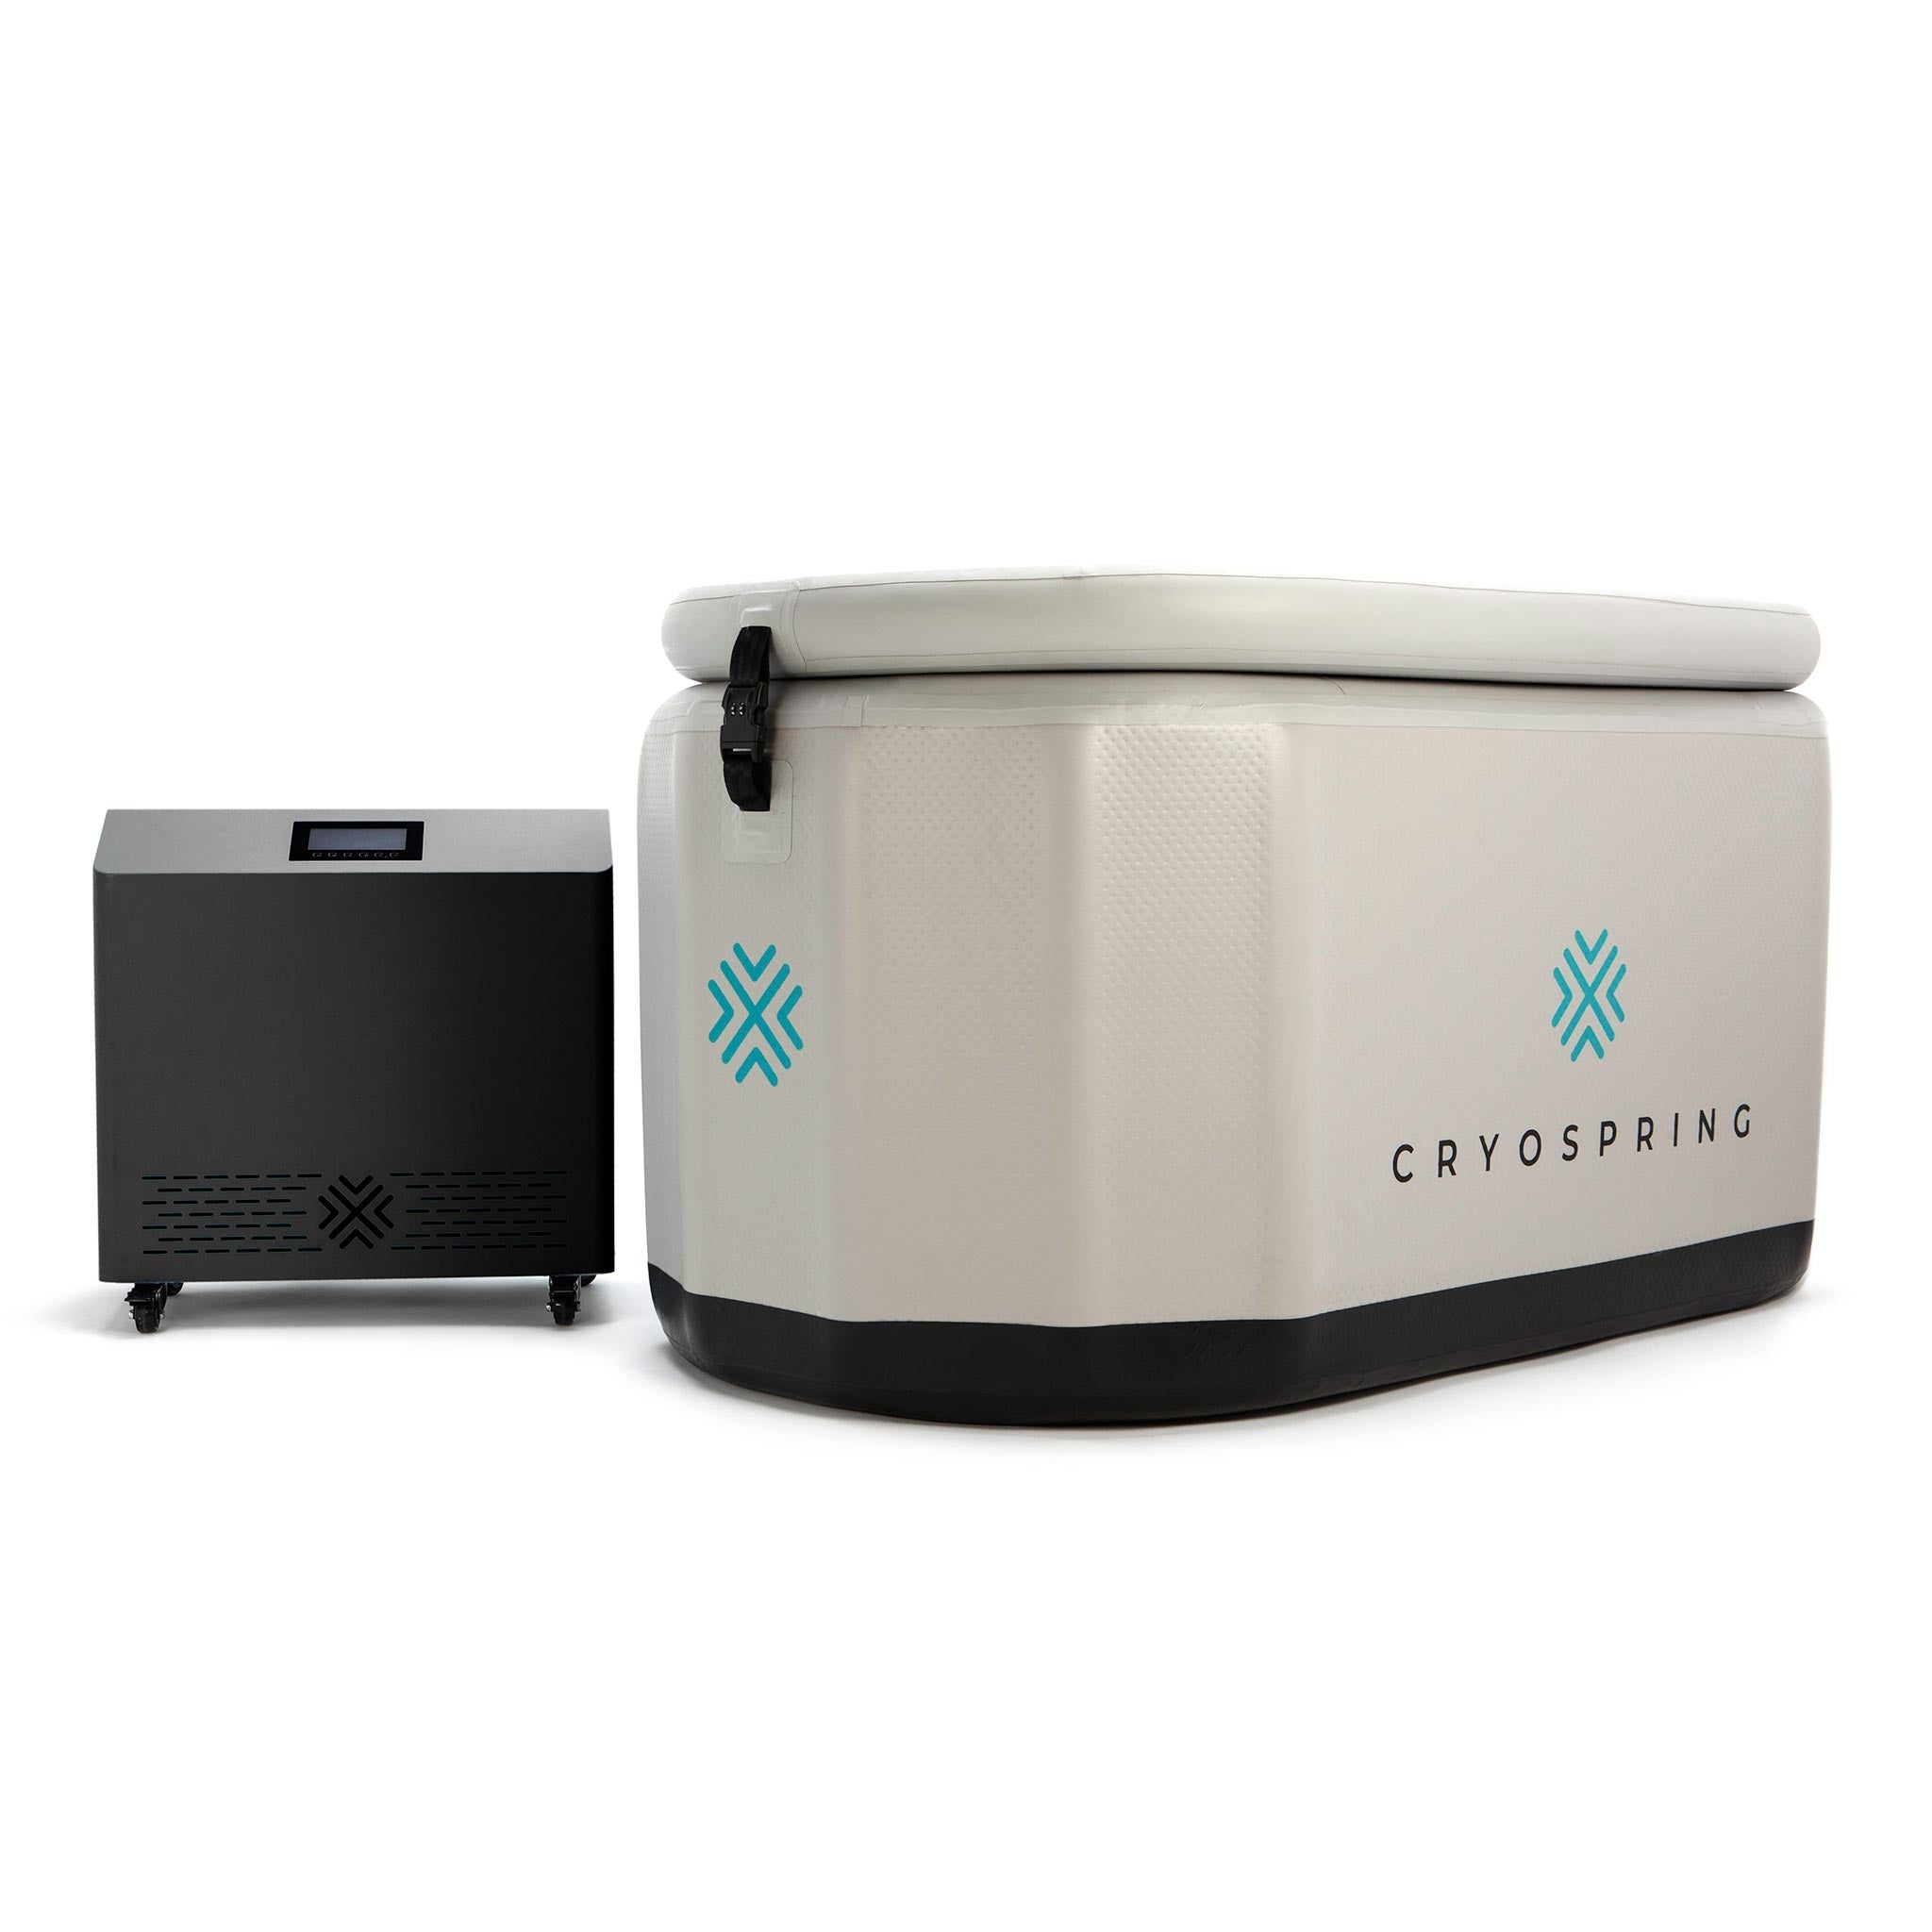 A CRYOSPRING Recovery routine box.